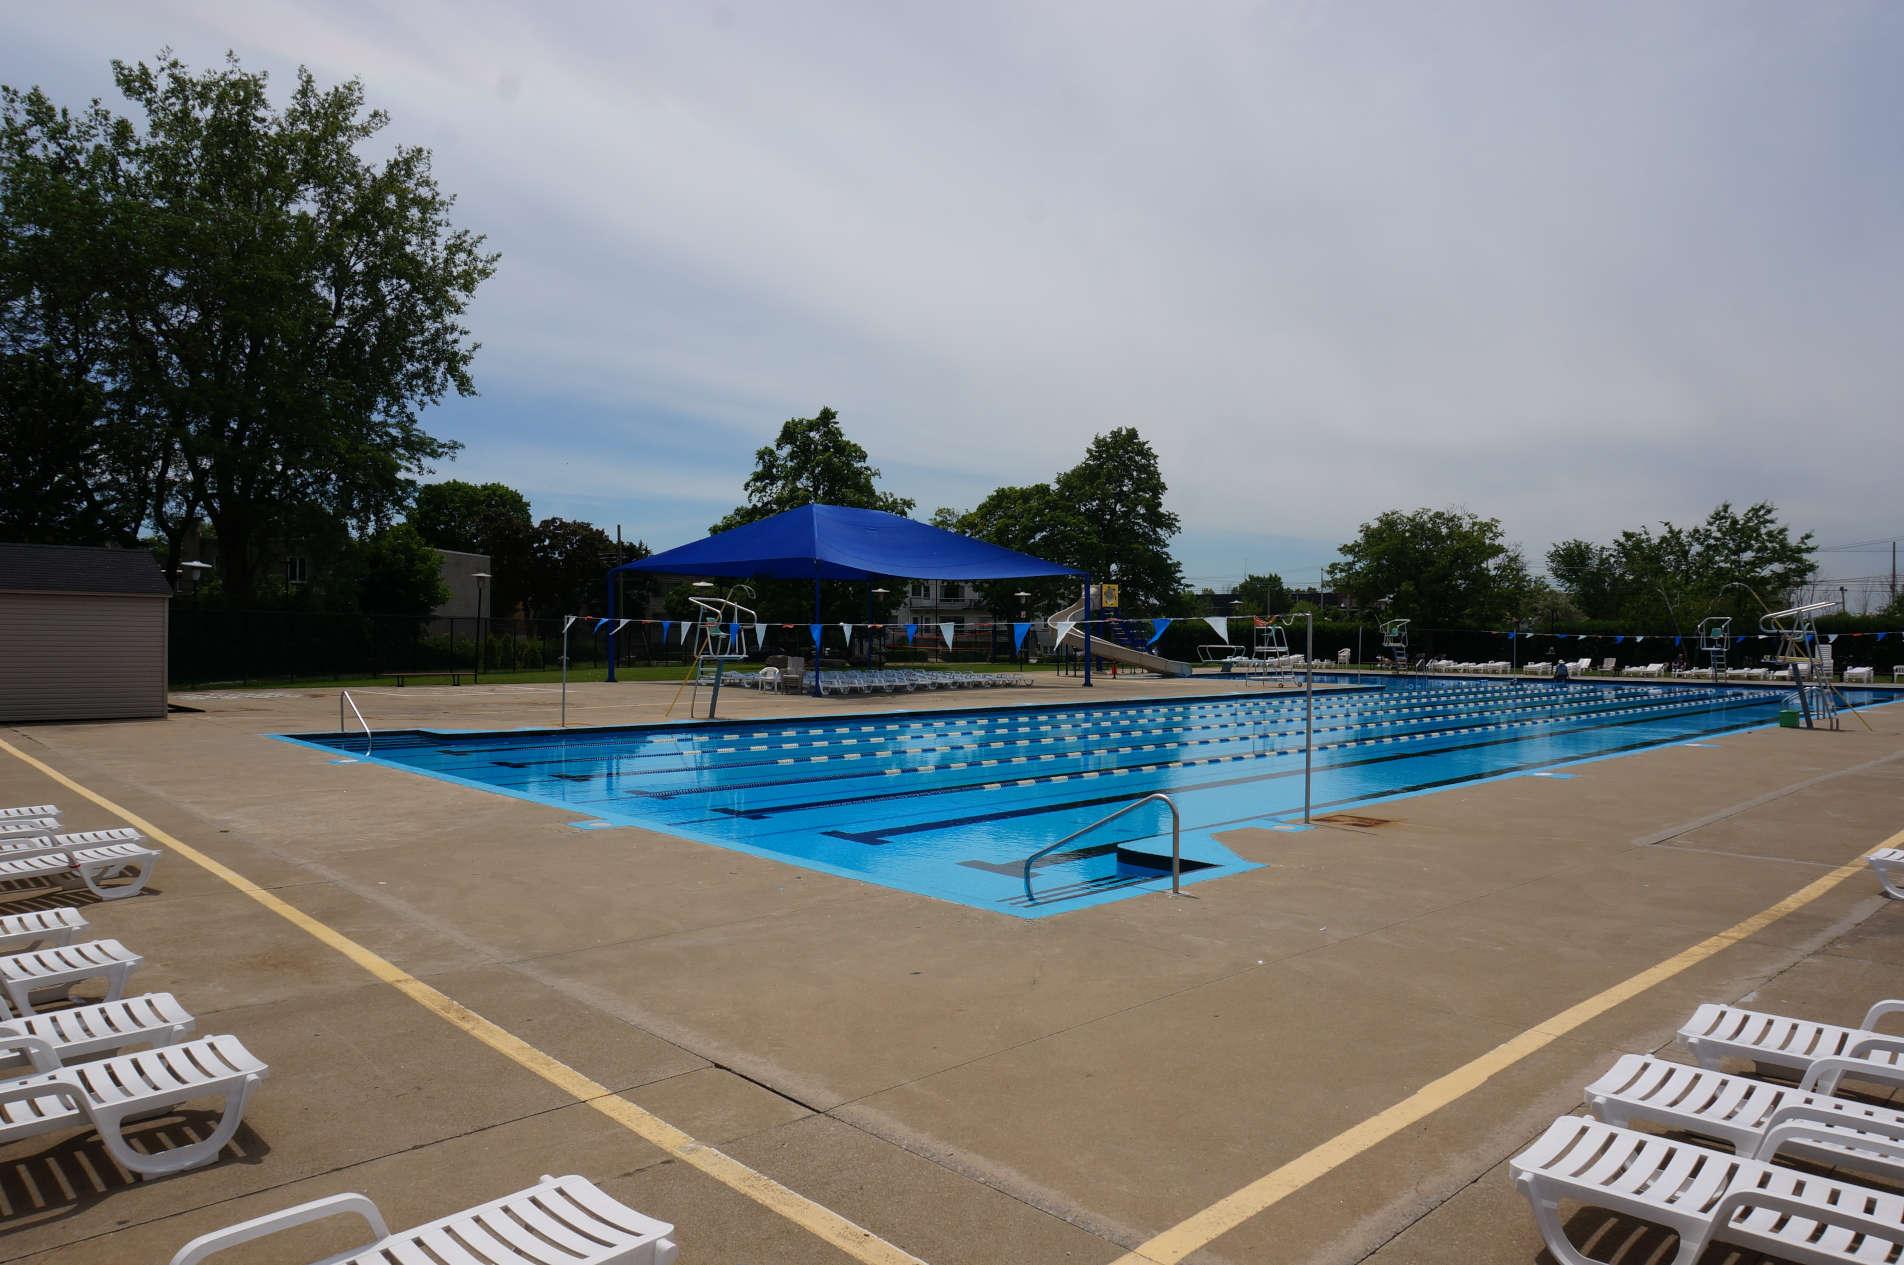 Parkhaven outdoor pool and wading pool